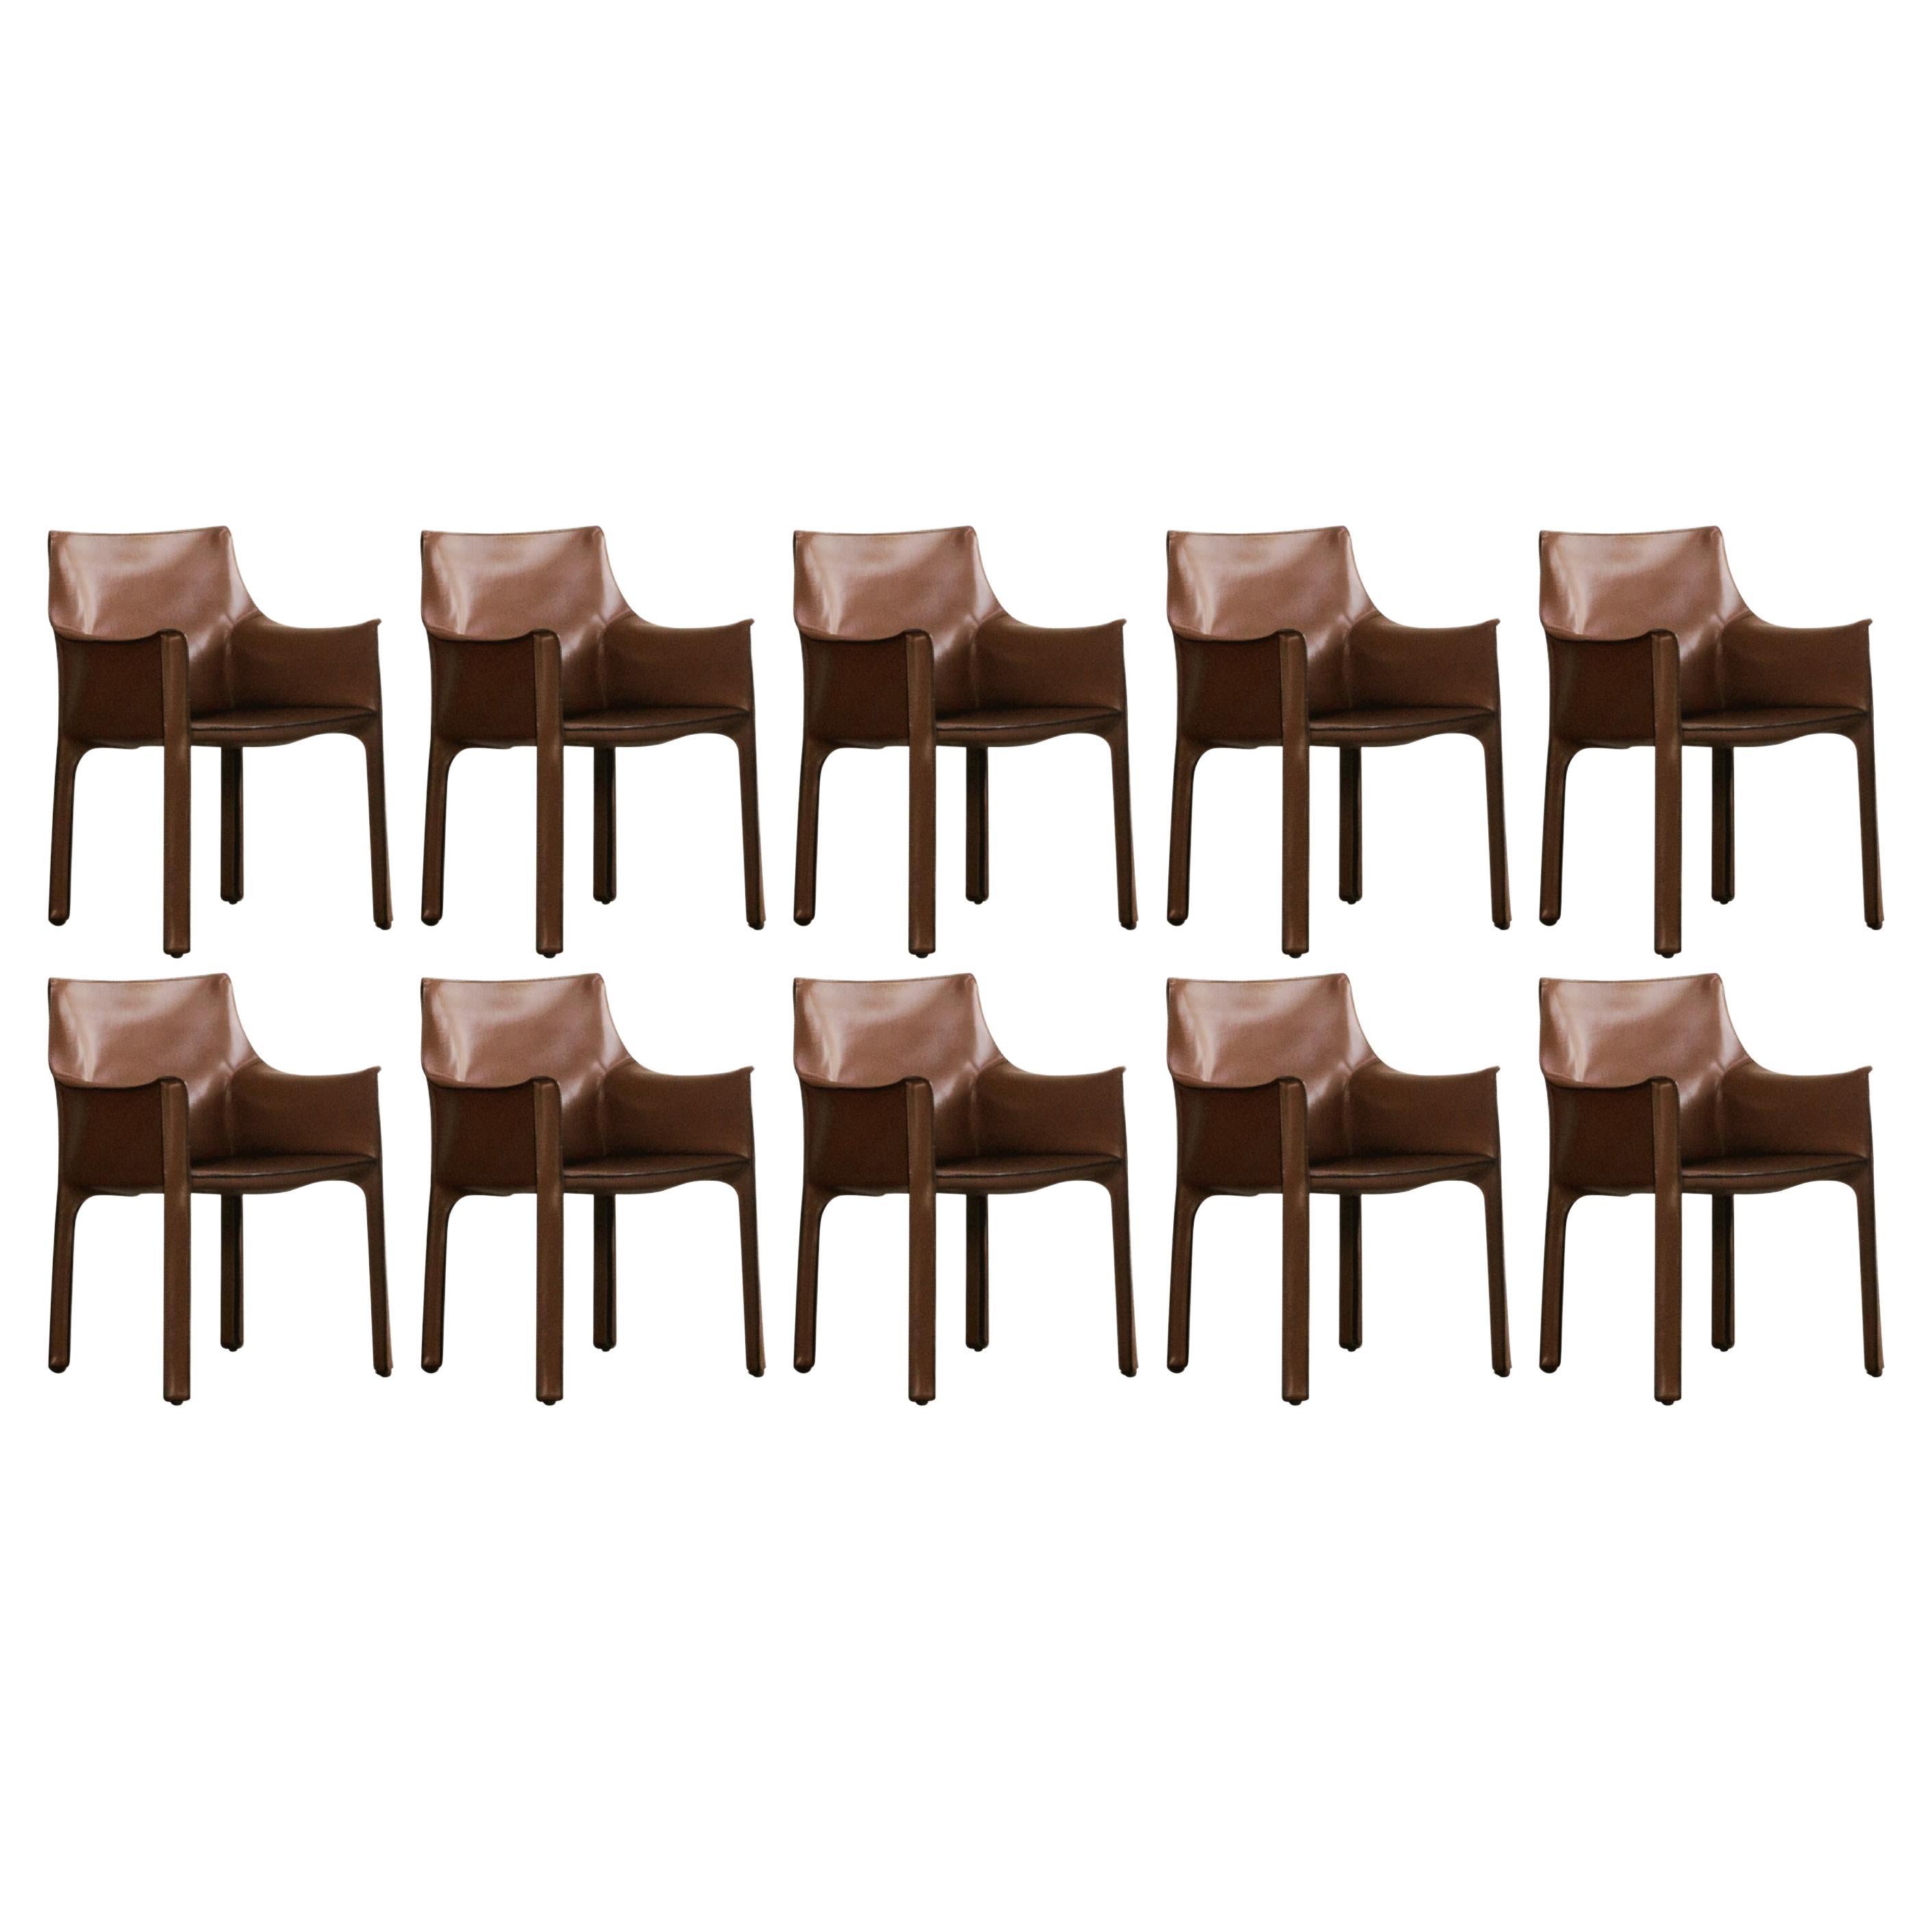 Mario Bellini "CAB 413" Chairs for Cassina in Light Brown, 1977, Set of 10